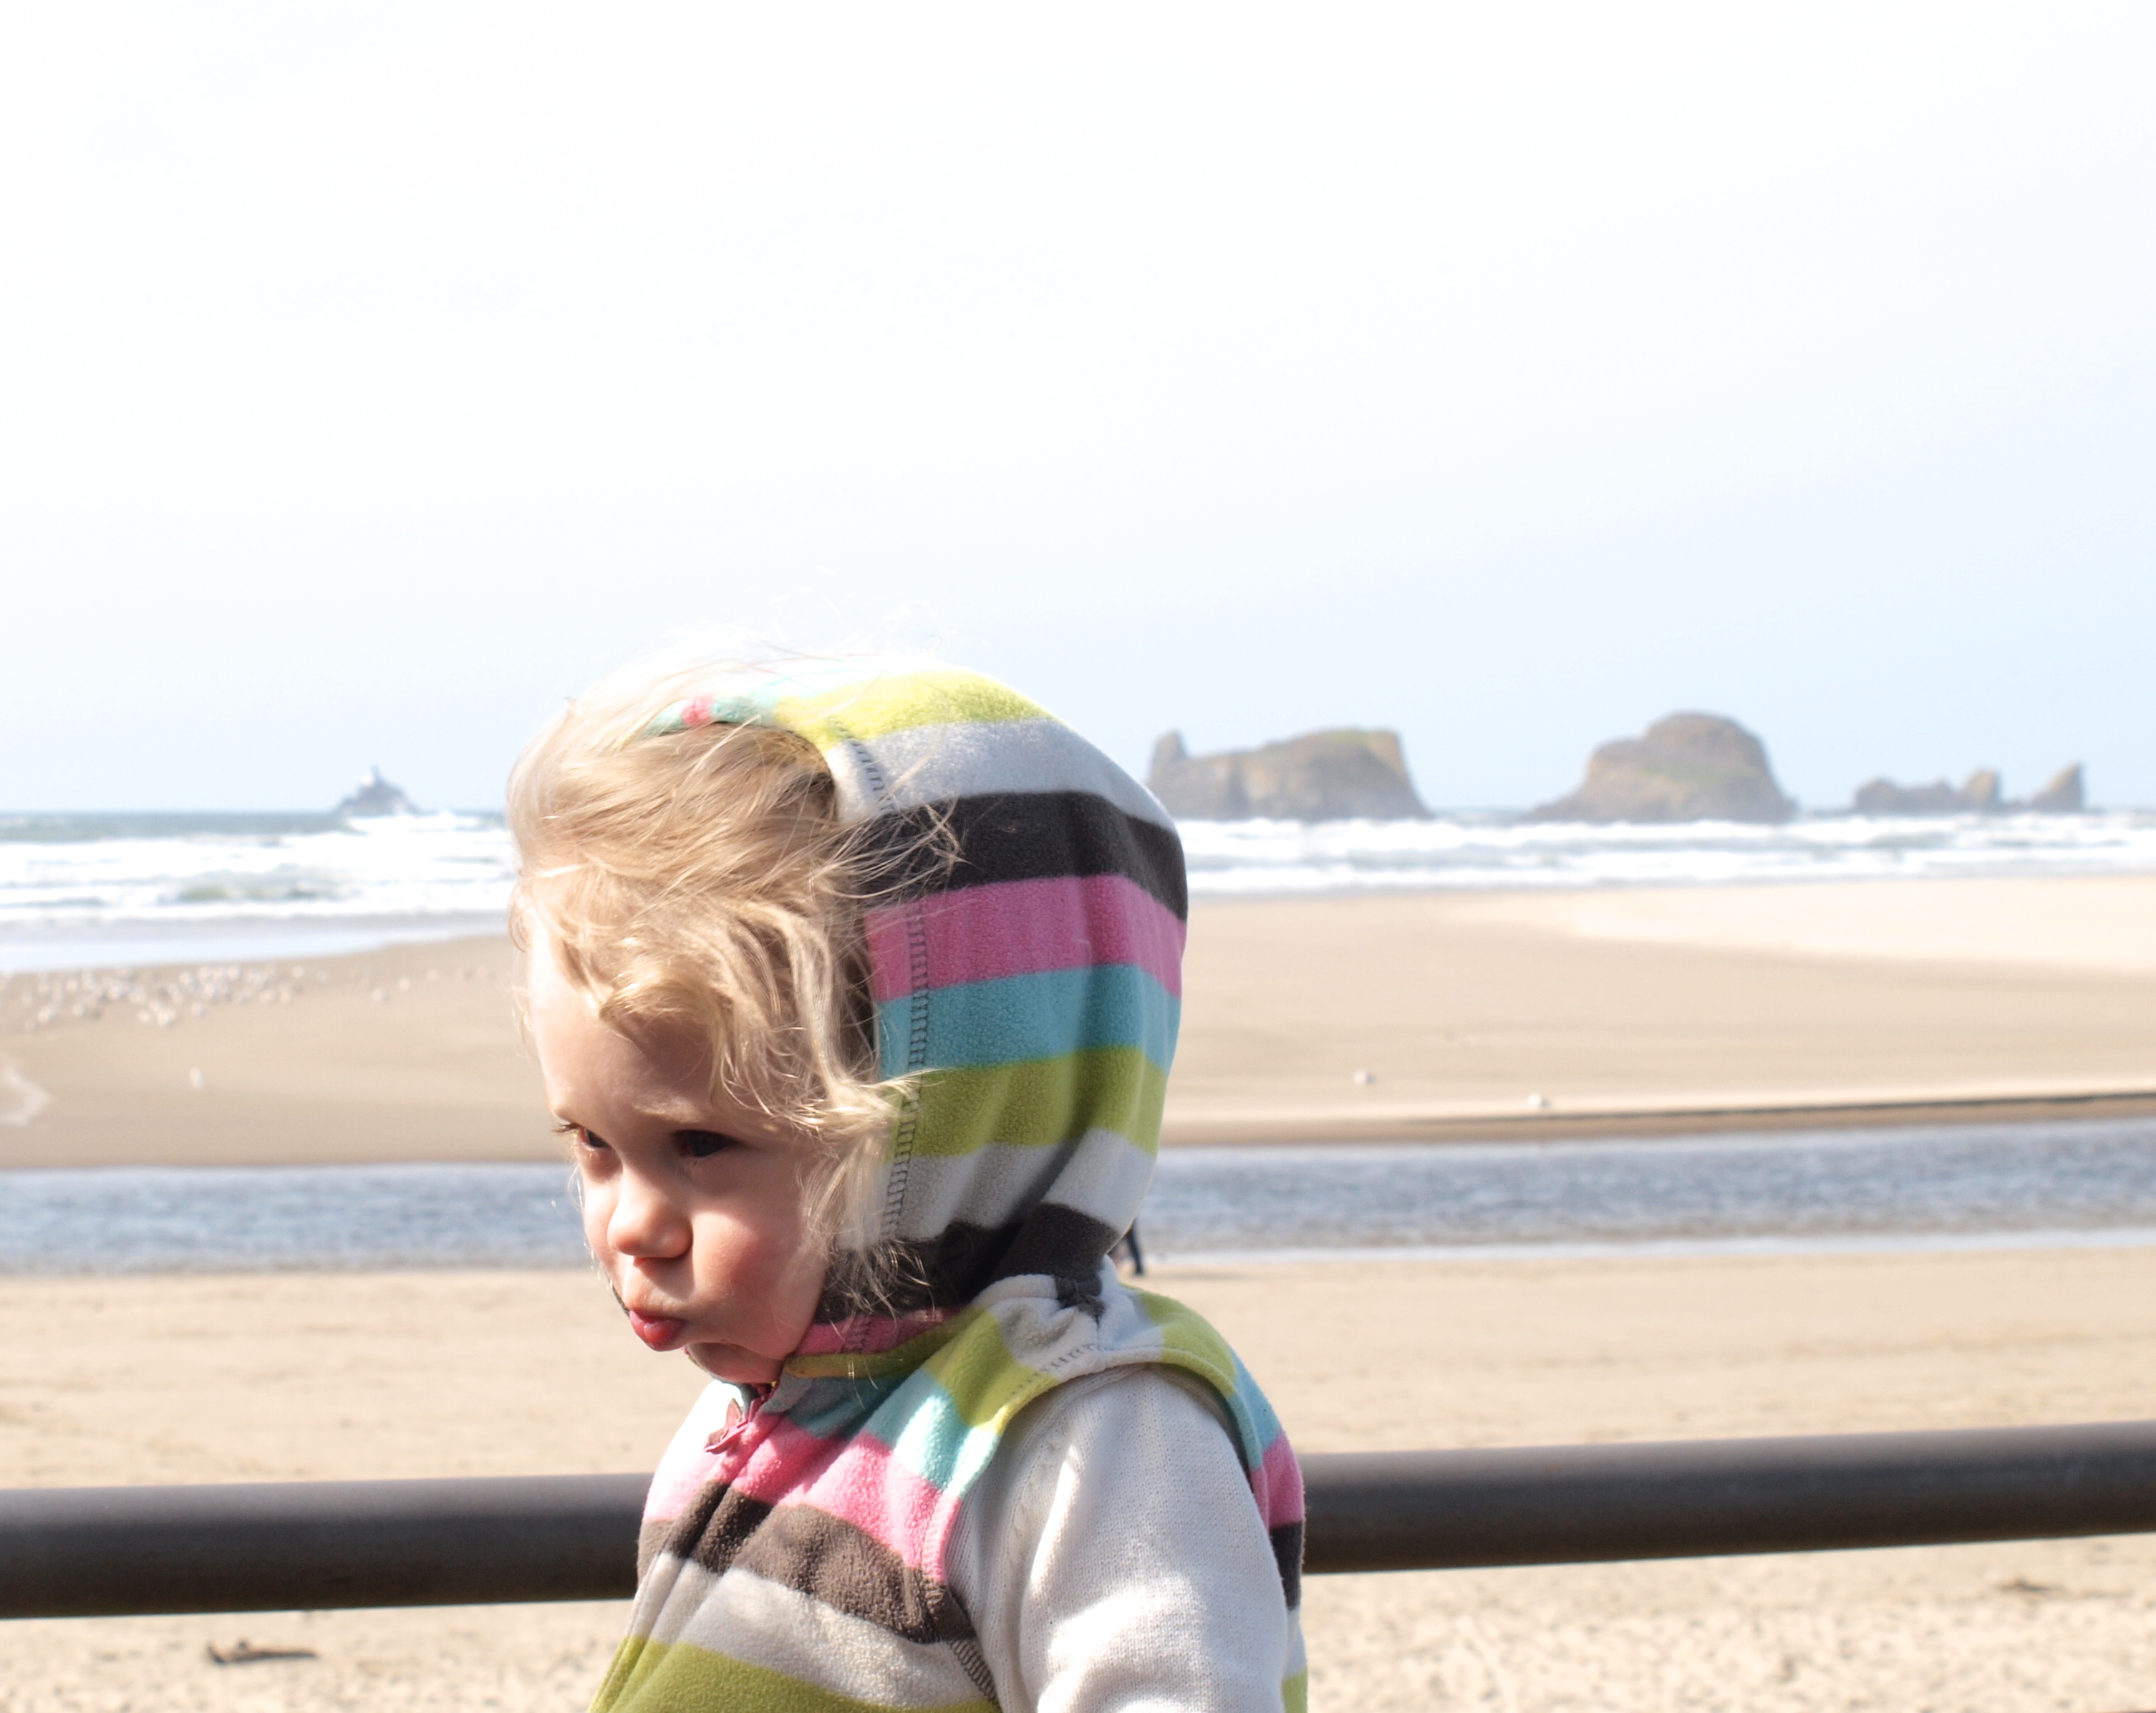 On Assignment Cannon Beach – Soft Explosions